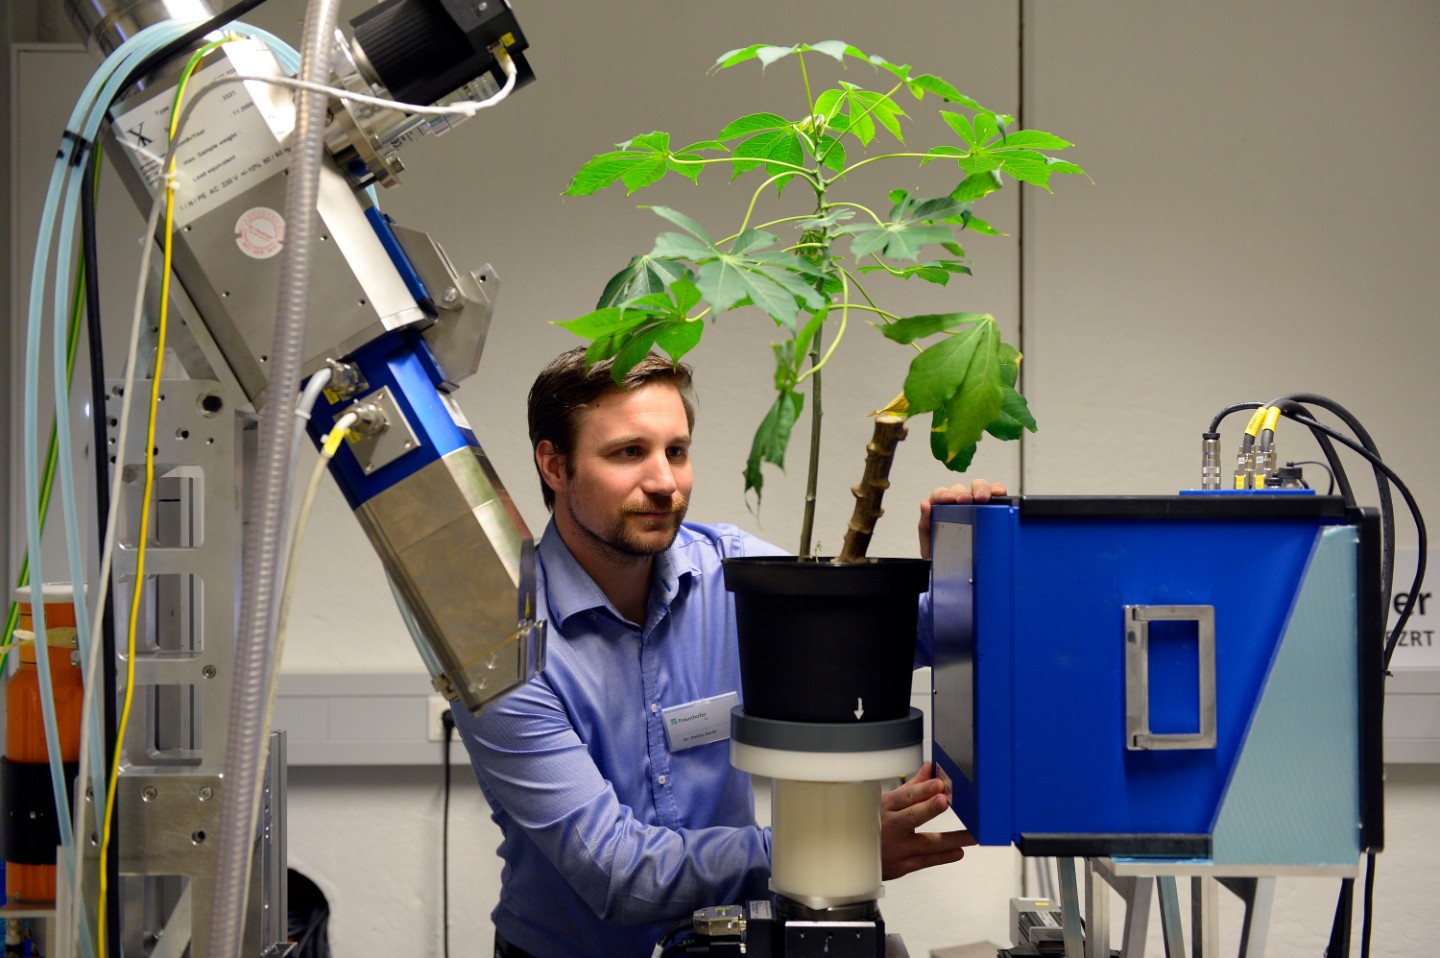 Dr. Stefan Gerth is a scientist and group leader at the Fraunhofer Development Center for X-ray Technology in Fürth. He coordinates the development of CT systems for the selection of heat-tolerant crops. With their research, his group is making an important contribution to how plant breeders can address climate change.